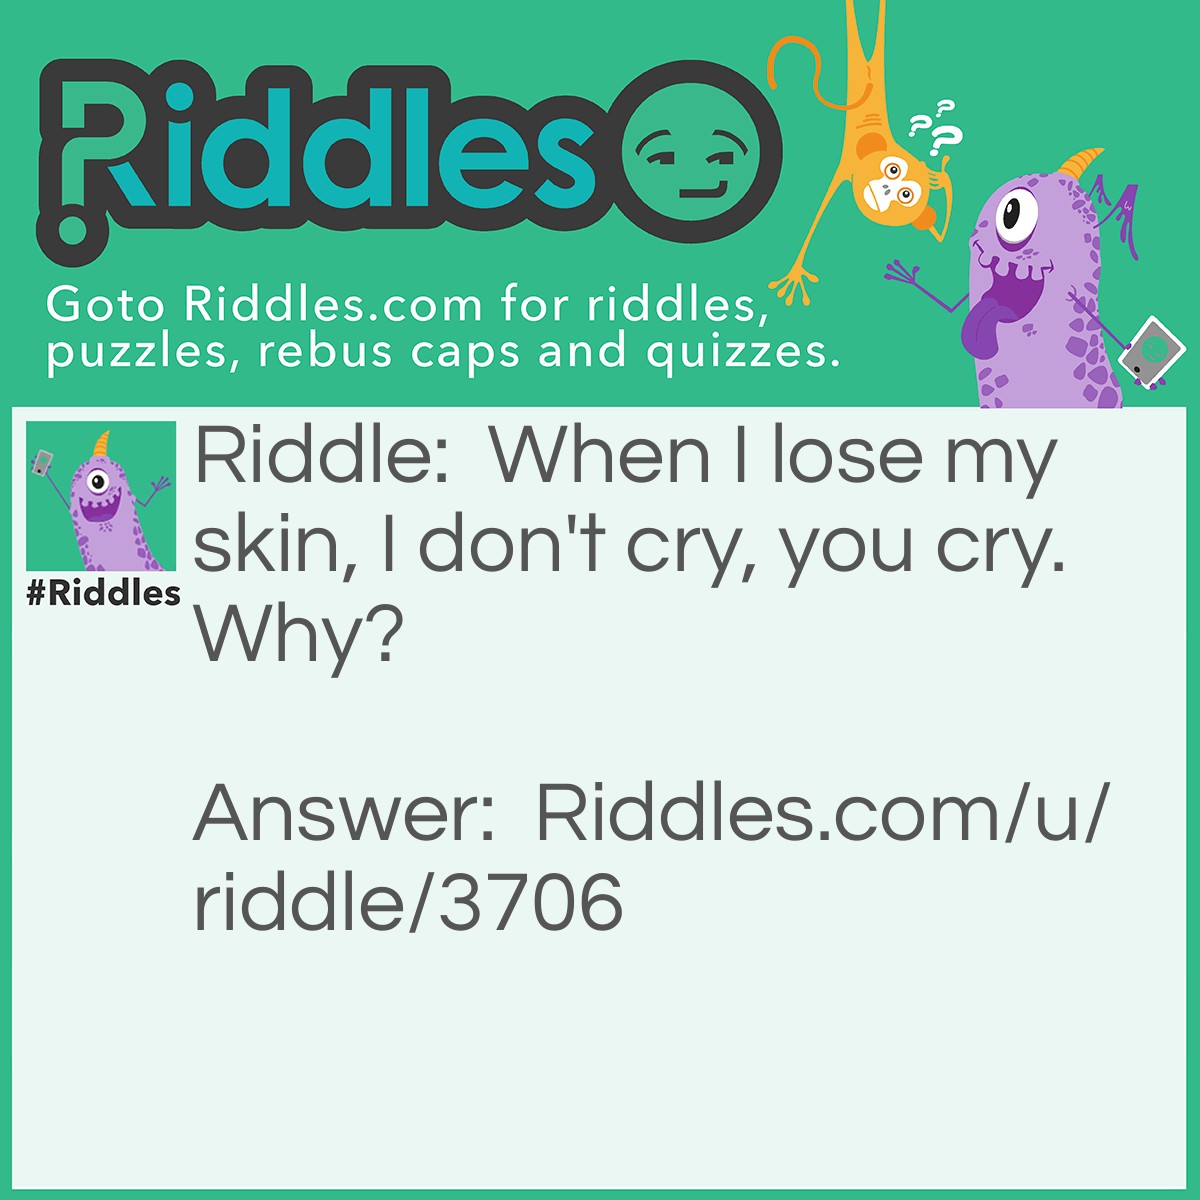 Riddle: When I lose my skin, I don't cry, you cry. Why? Answer: Because I'm an onion!